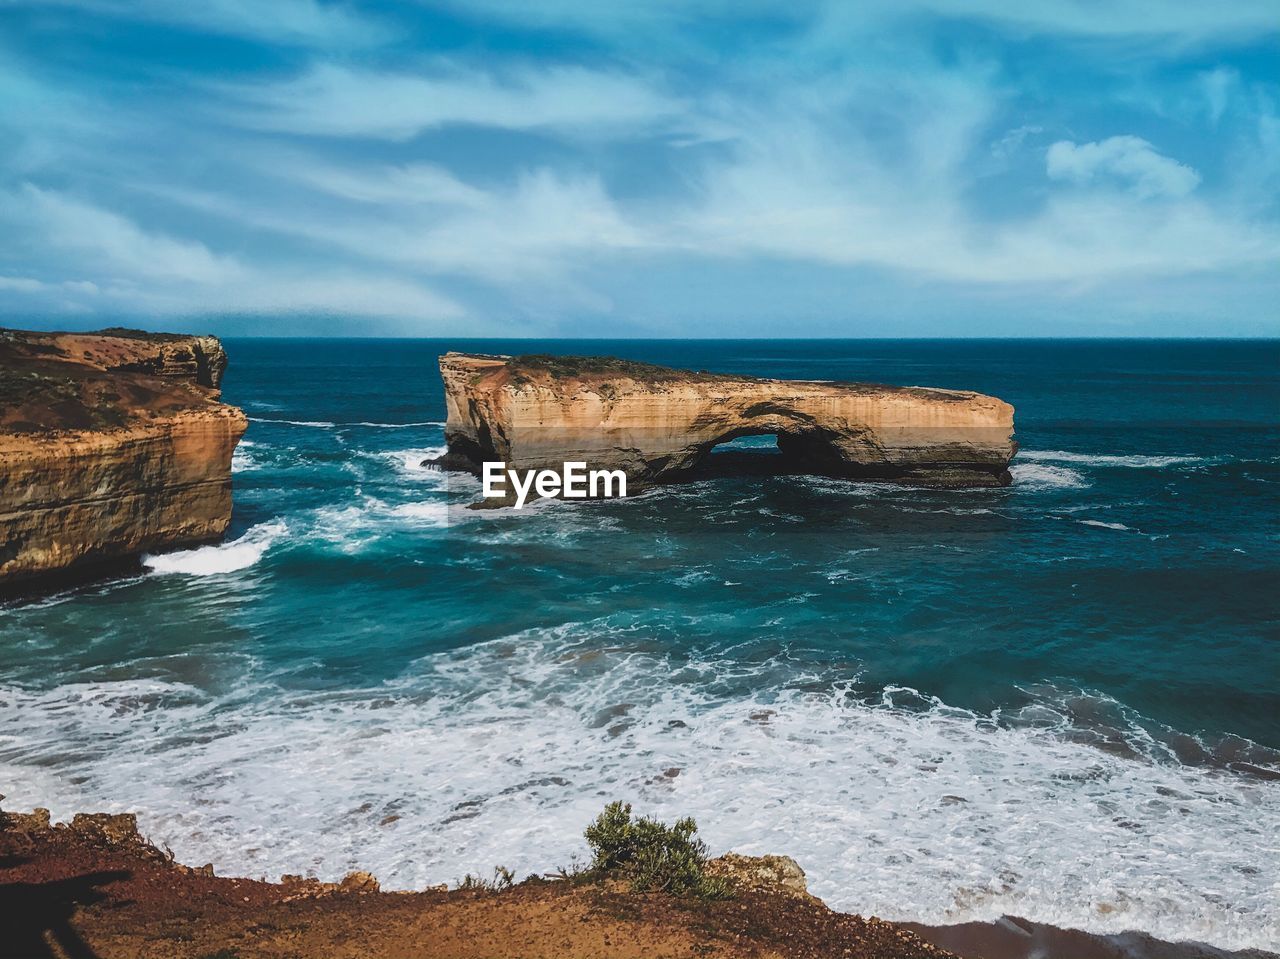 SCENIC VIEW OF ROCK FORMATION IN SEA AGAINST SKY